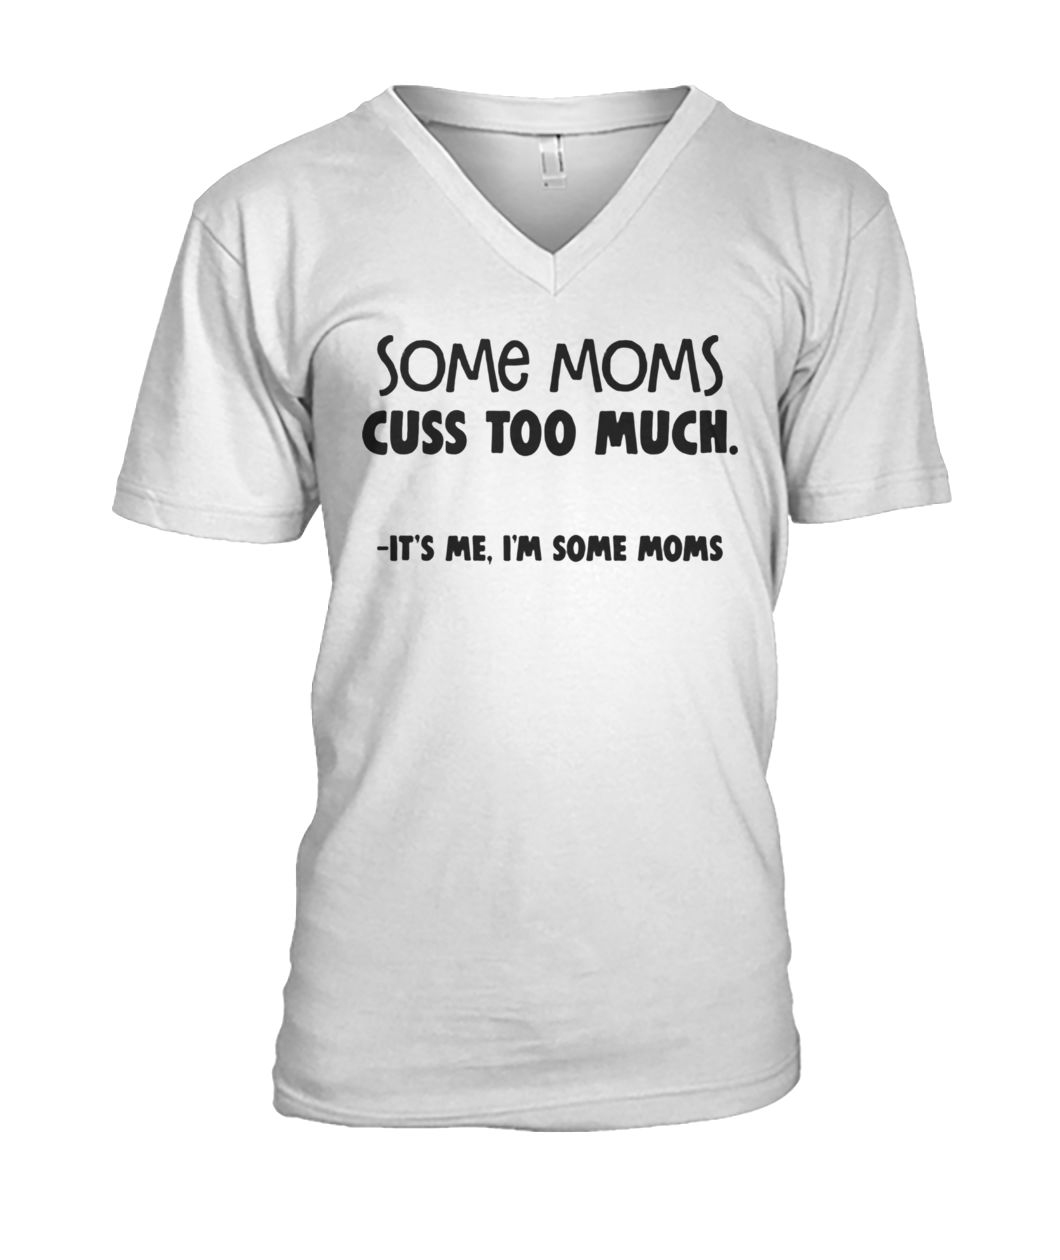 Some moms cuss too much it's me I'm some moms mens v-neck